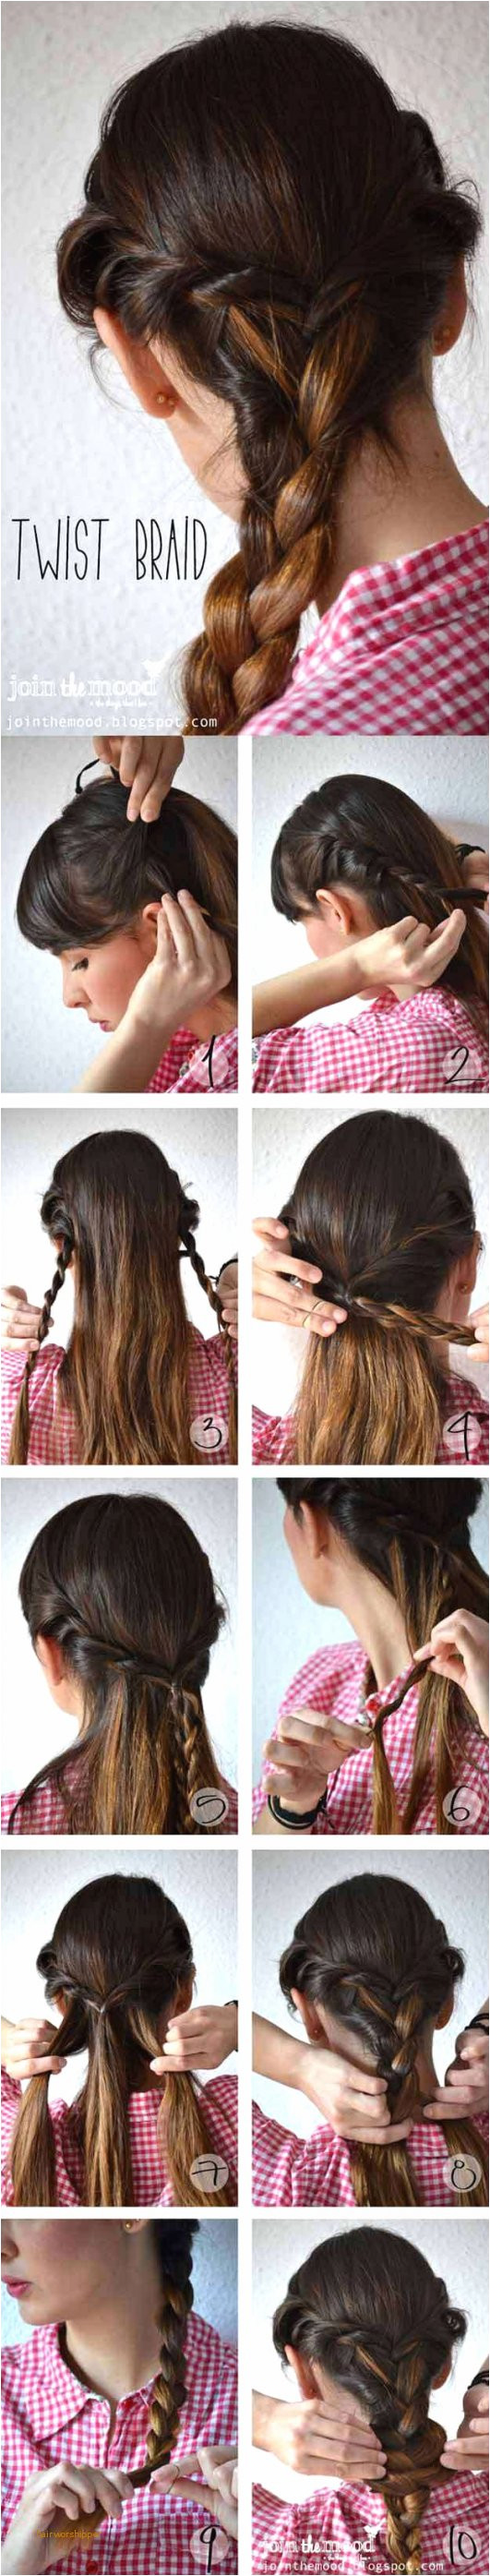 Easy Diy Hairstyles Step by Step New Easy Hairstyle Tutorials for Medium Length